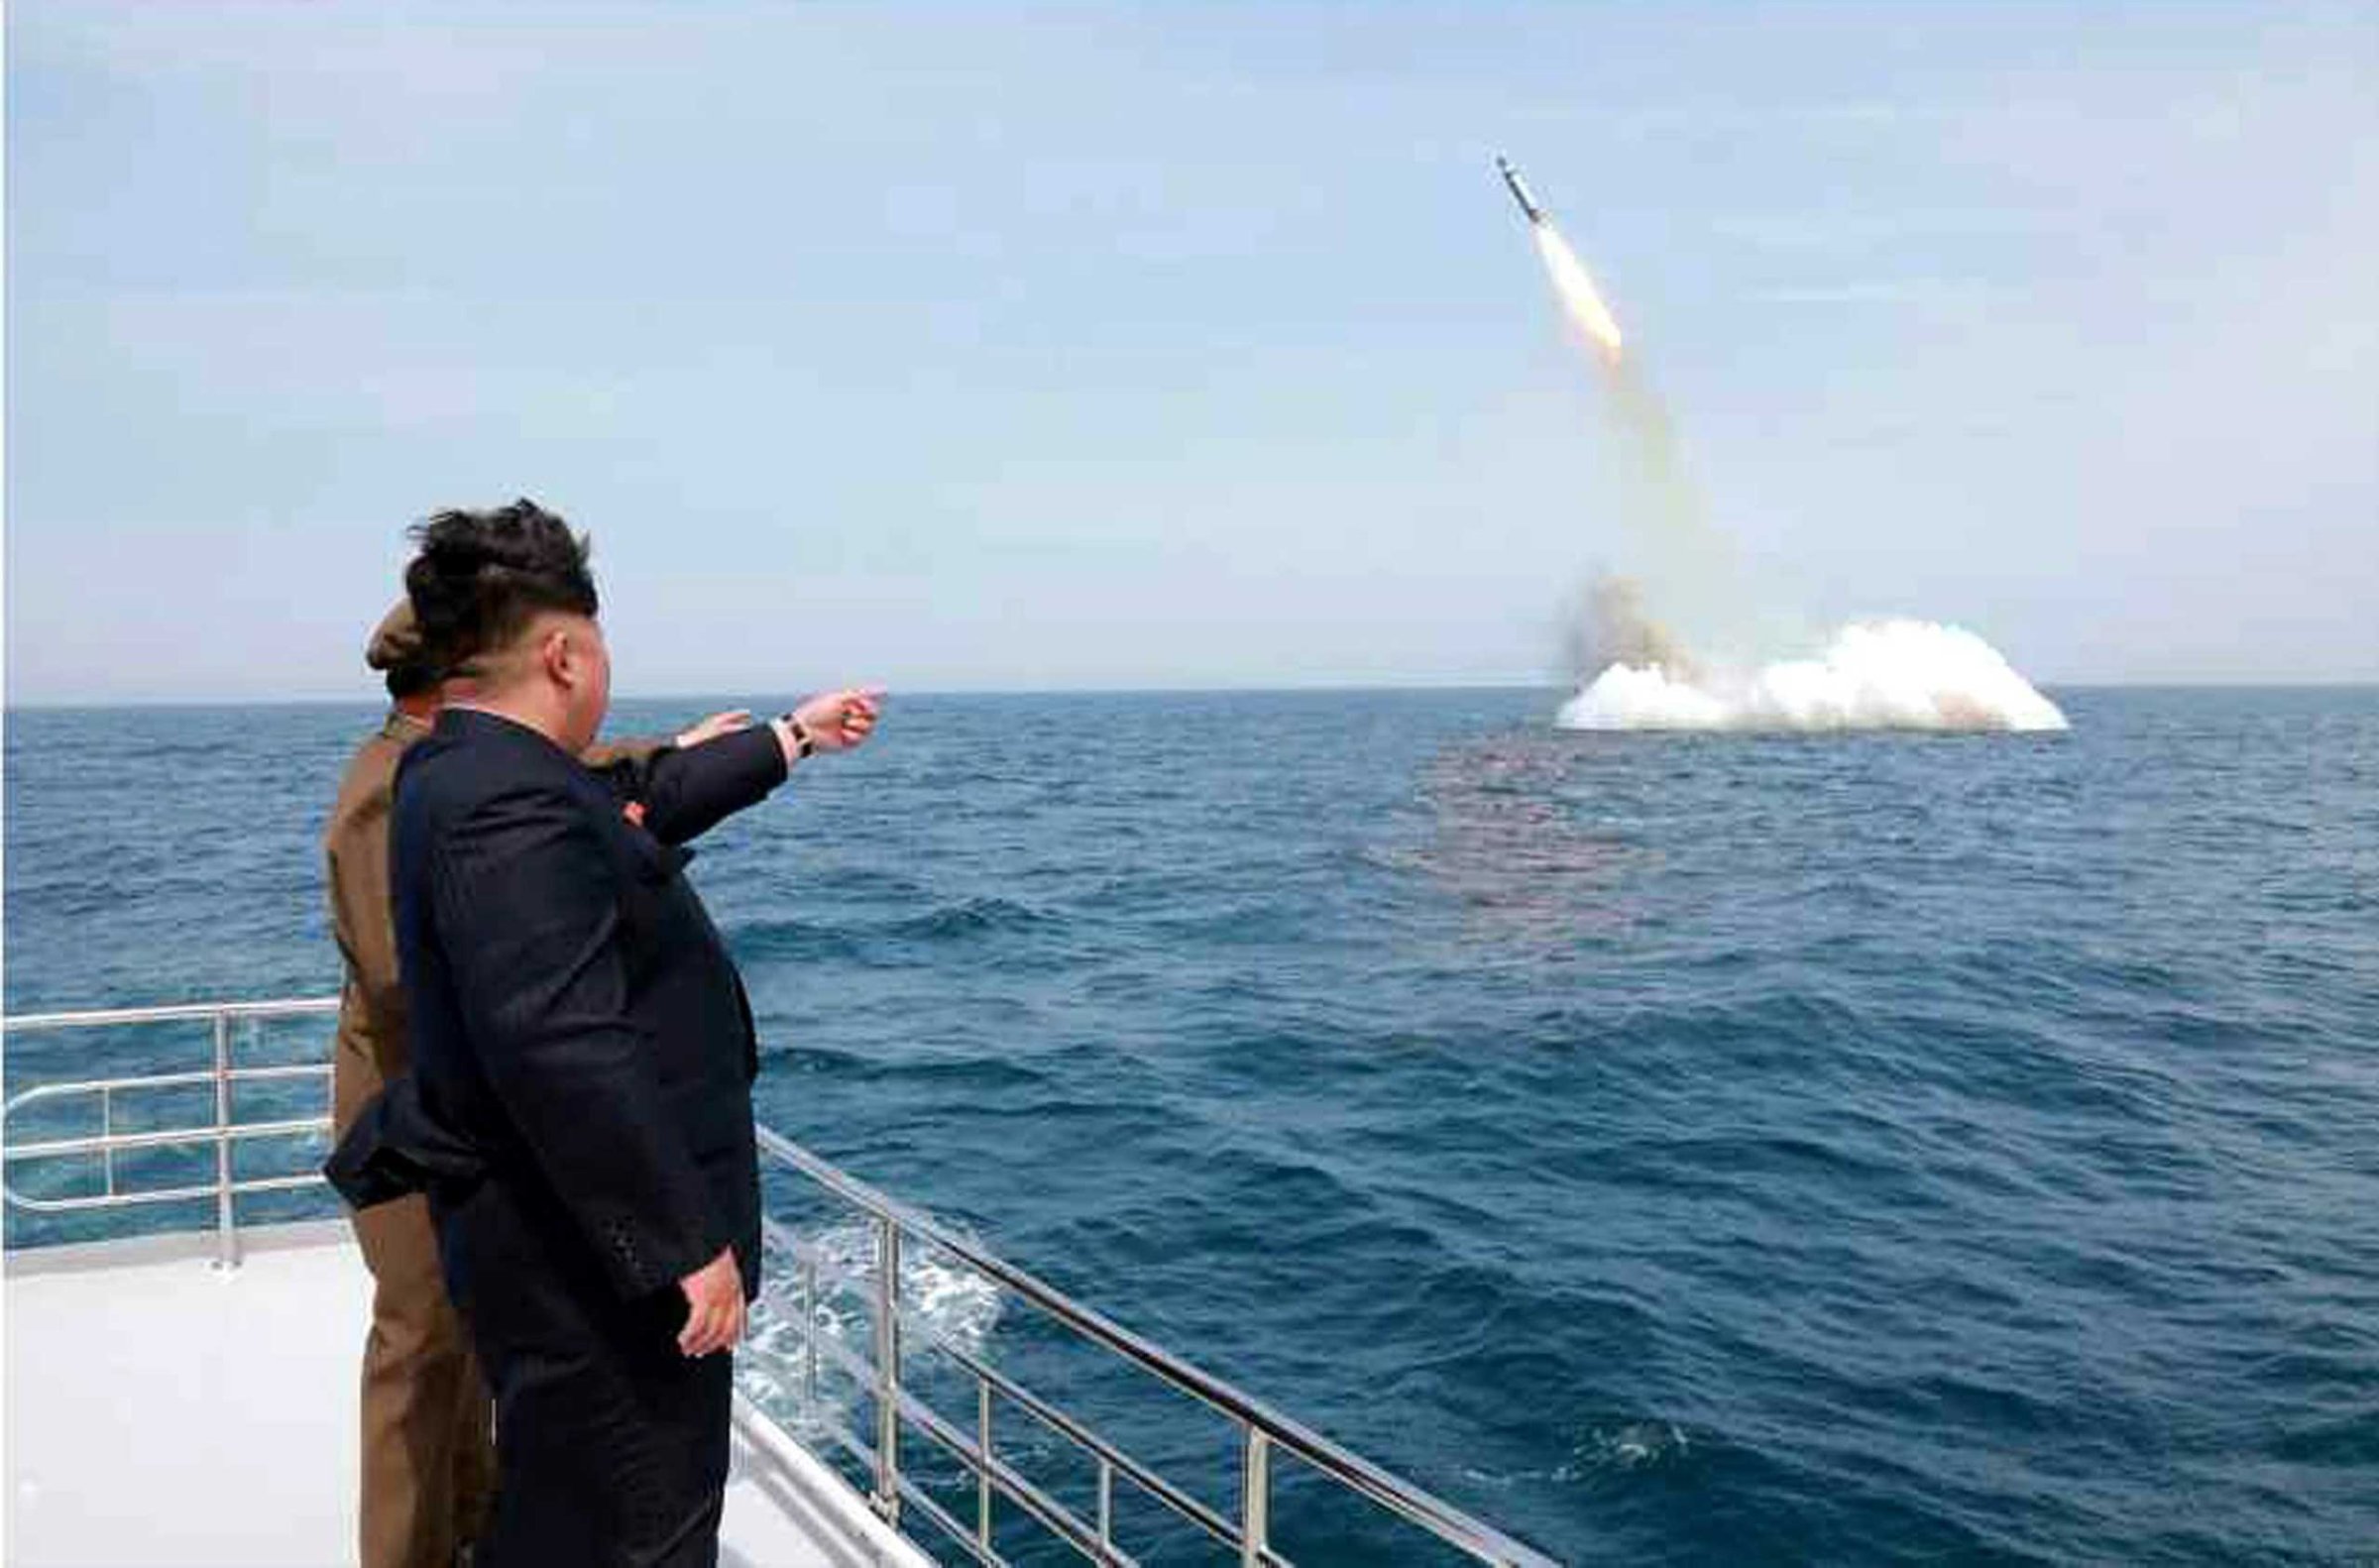 Photo showing North Korean leader Kim Jong-un at the scene of the alleged missile launch on May 9, 2015.